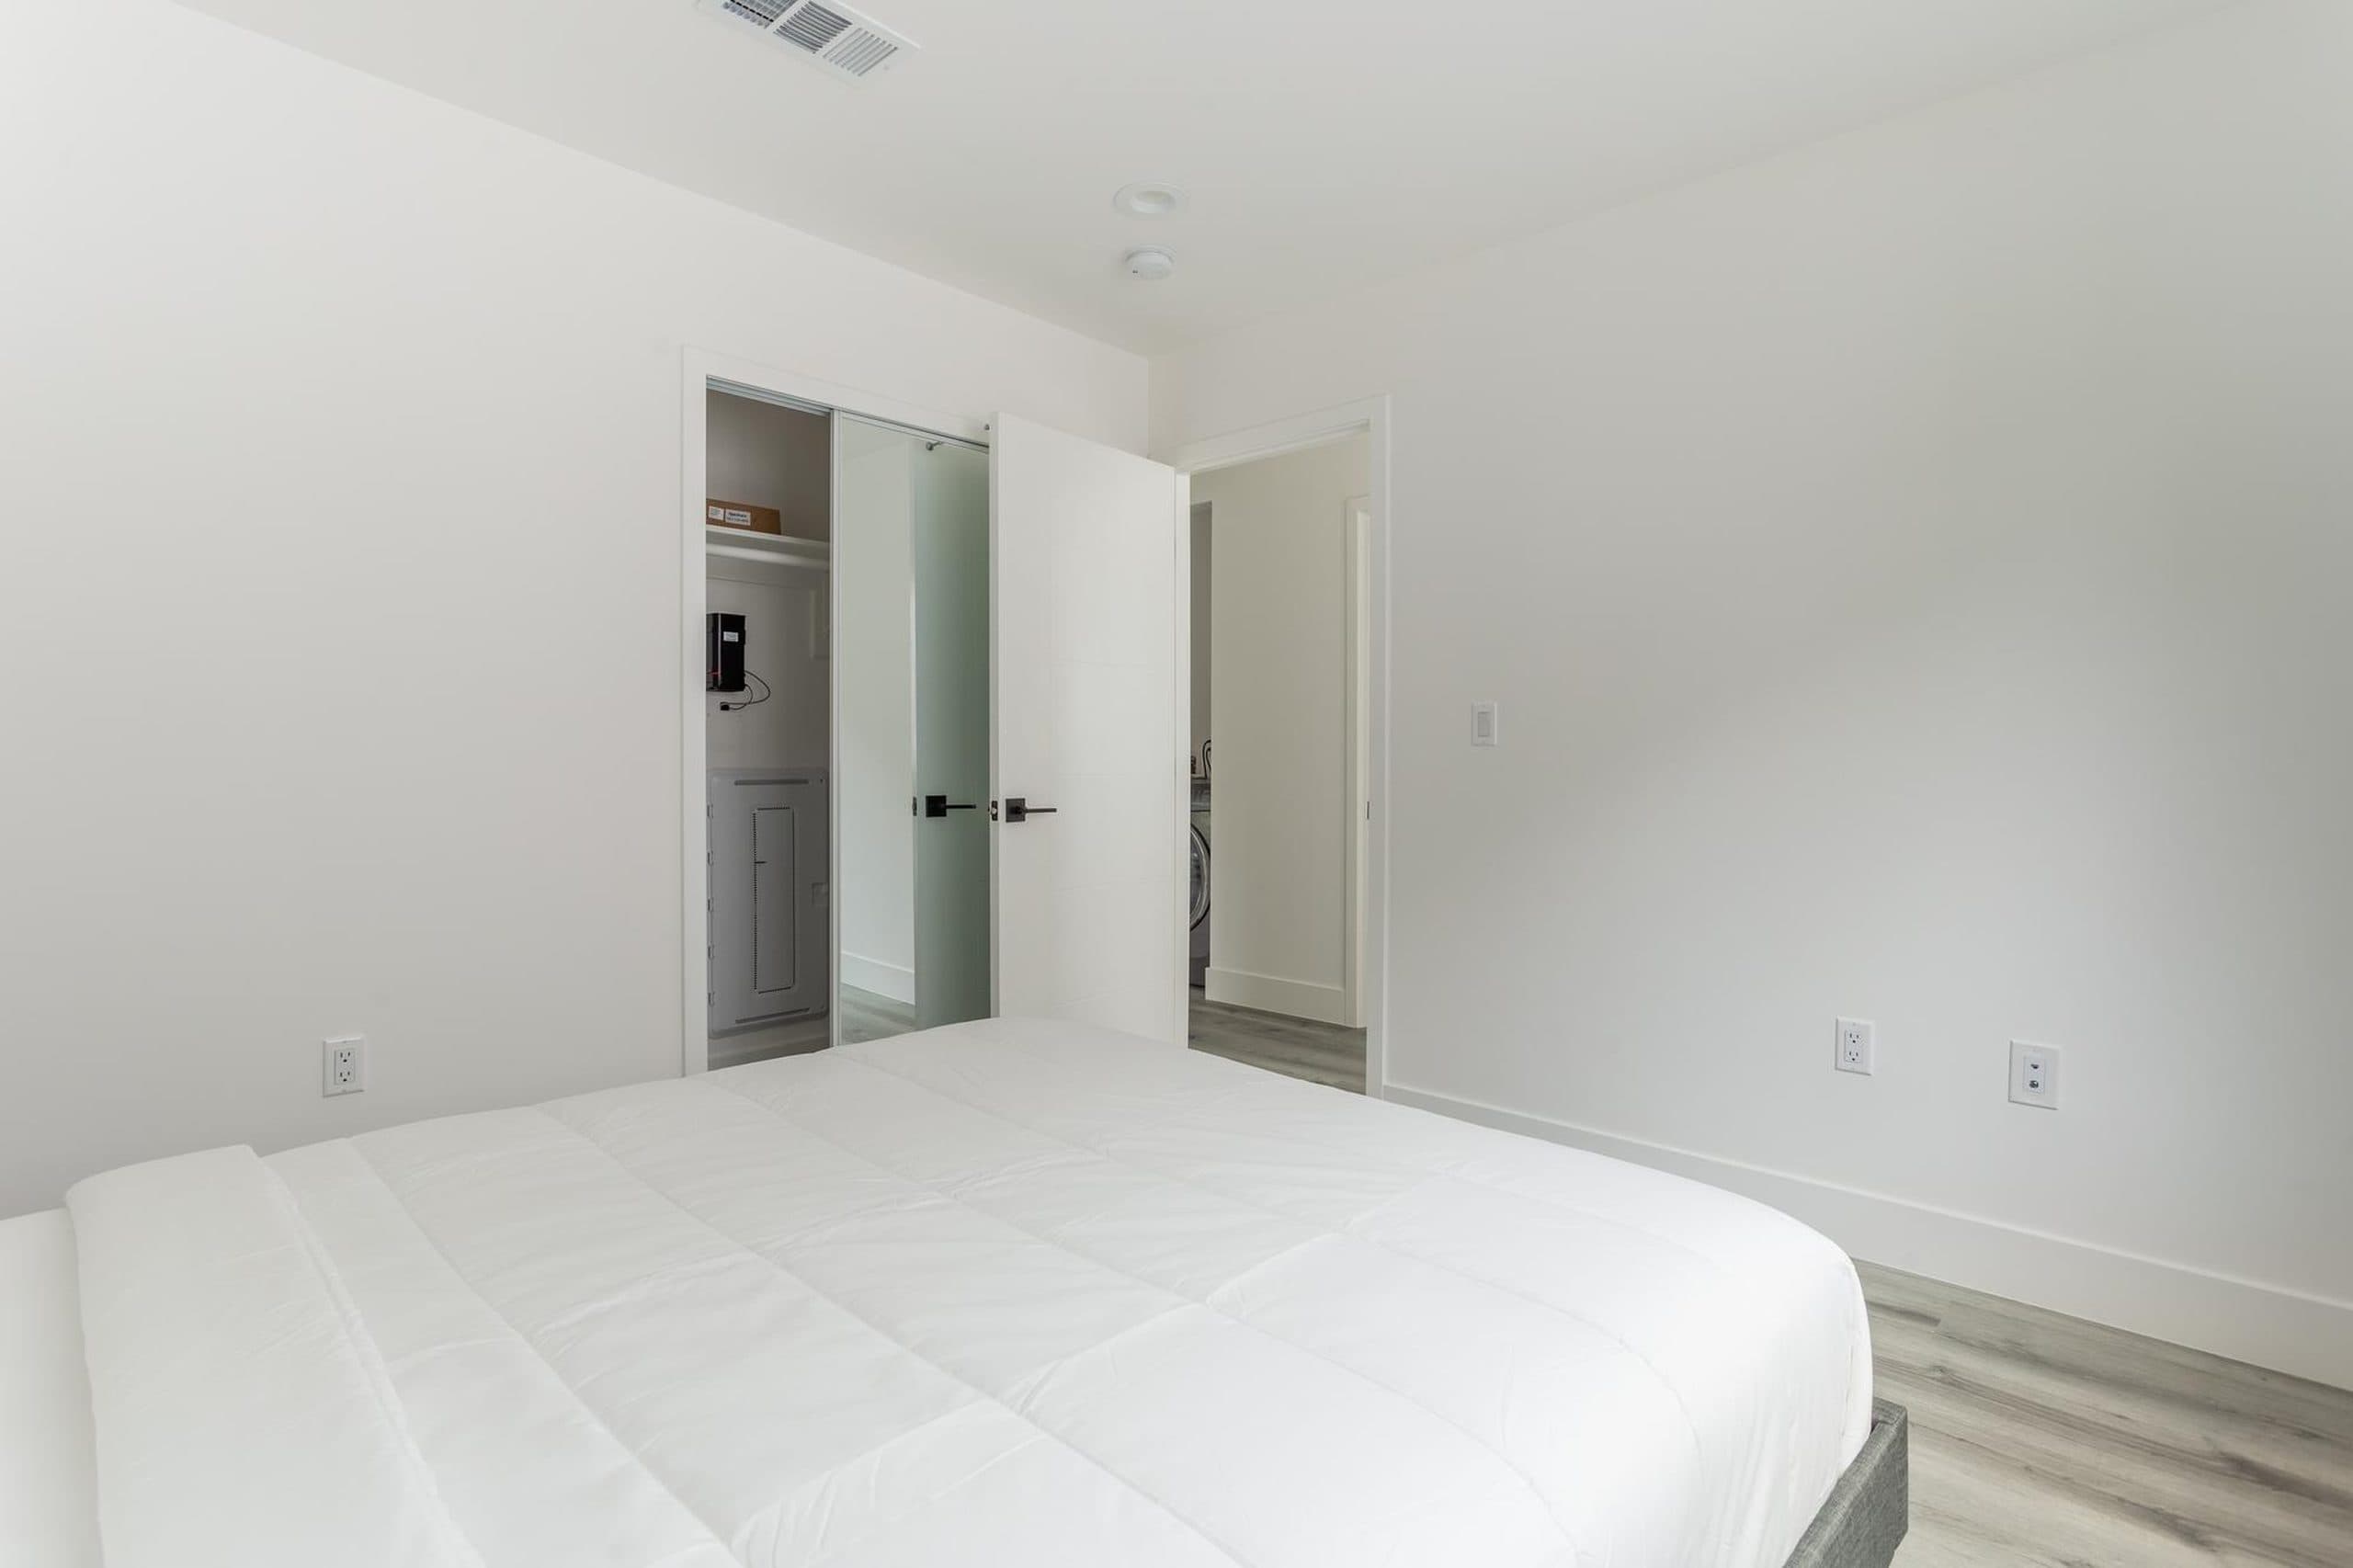 Photo 20 of #4054: Queen Bedroom D w/Private Bathroom at June Homes